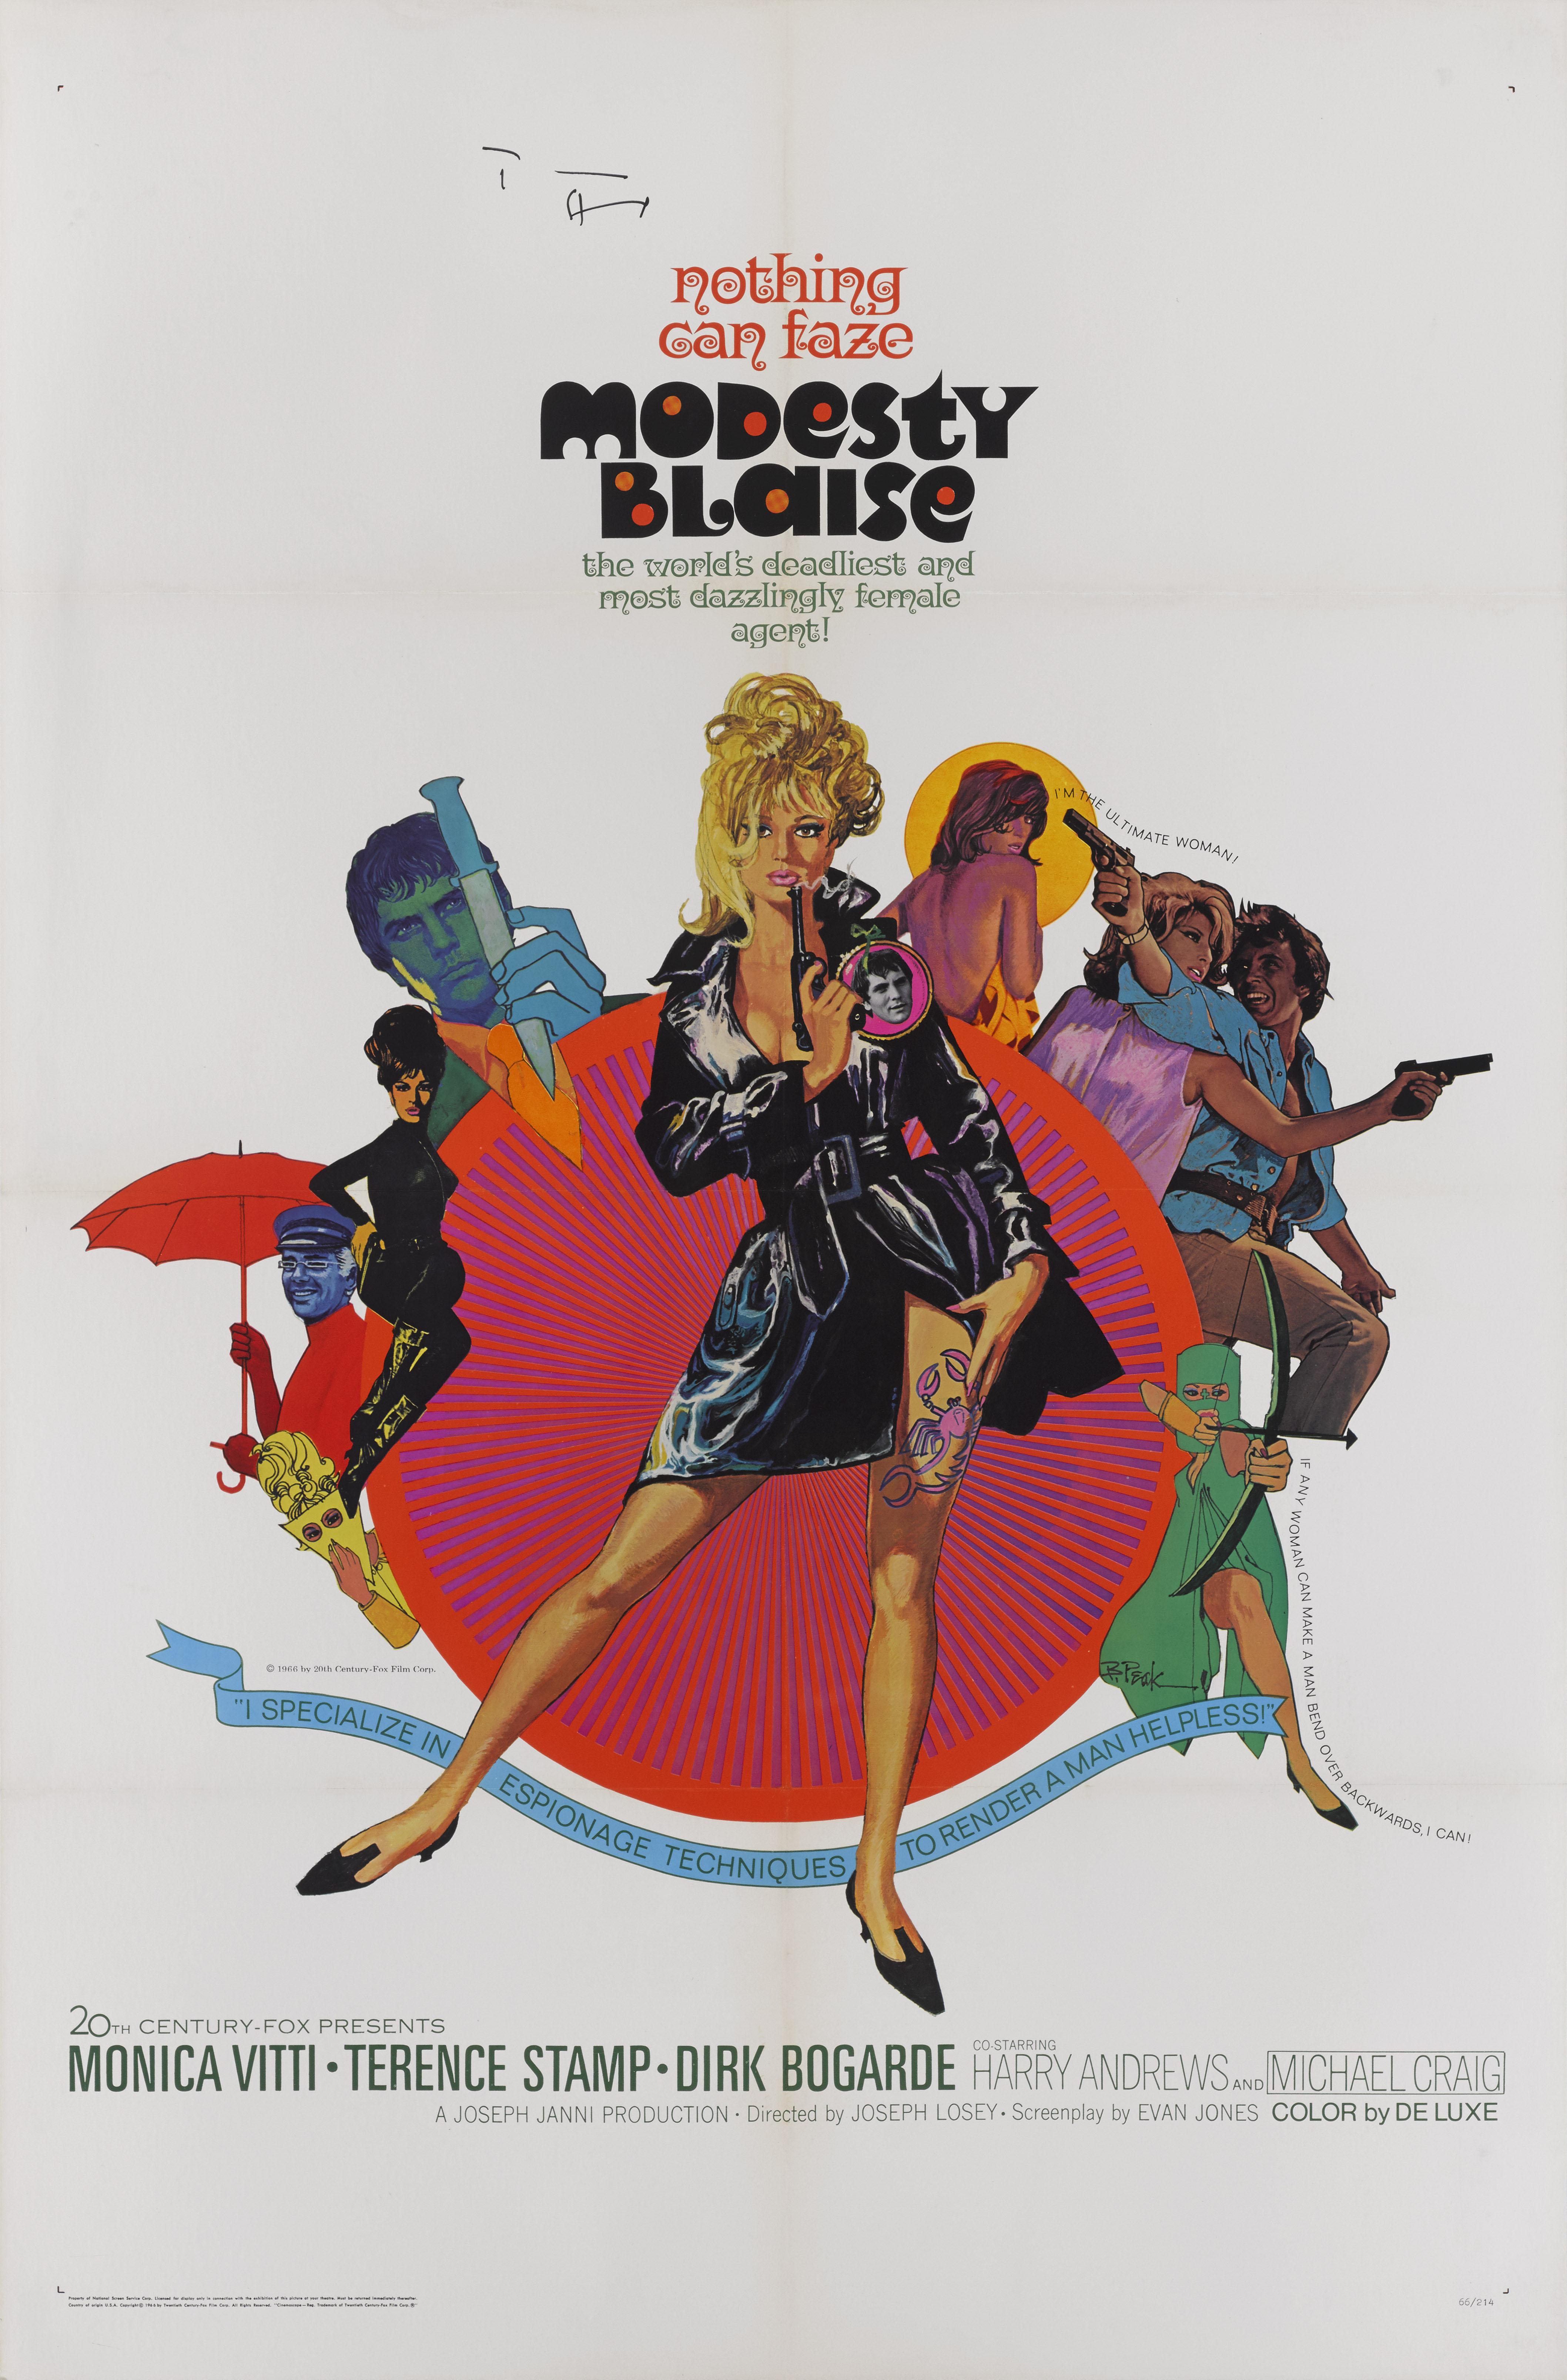 Original US film poster designed by Bob Peak (1927-1992) and used for the 1966 film directed by Joseph Losey, and is roughly based on the popular comic strip Modesty Blaise by Peter O'Donnell. The film stars Monica Vitti (in her first English